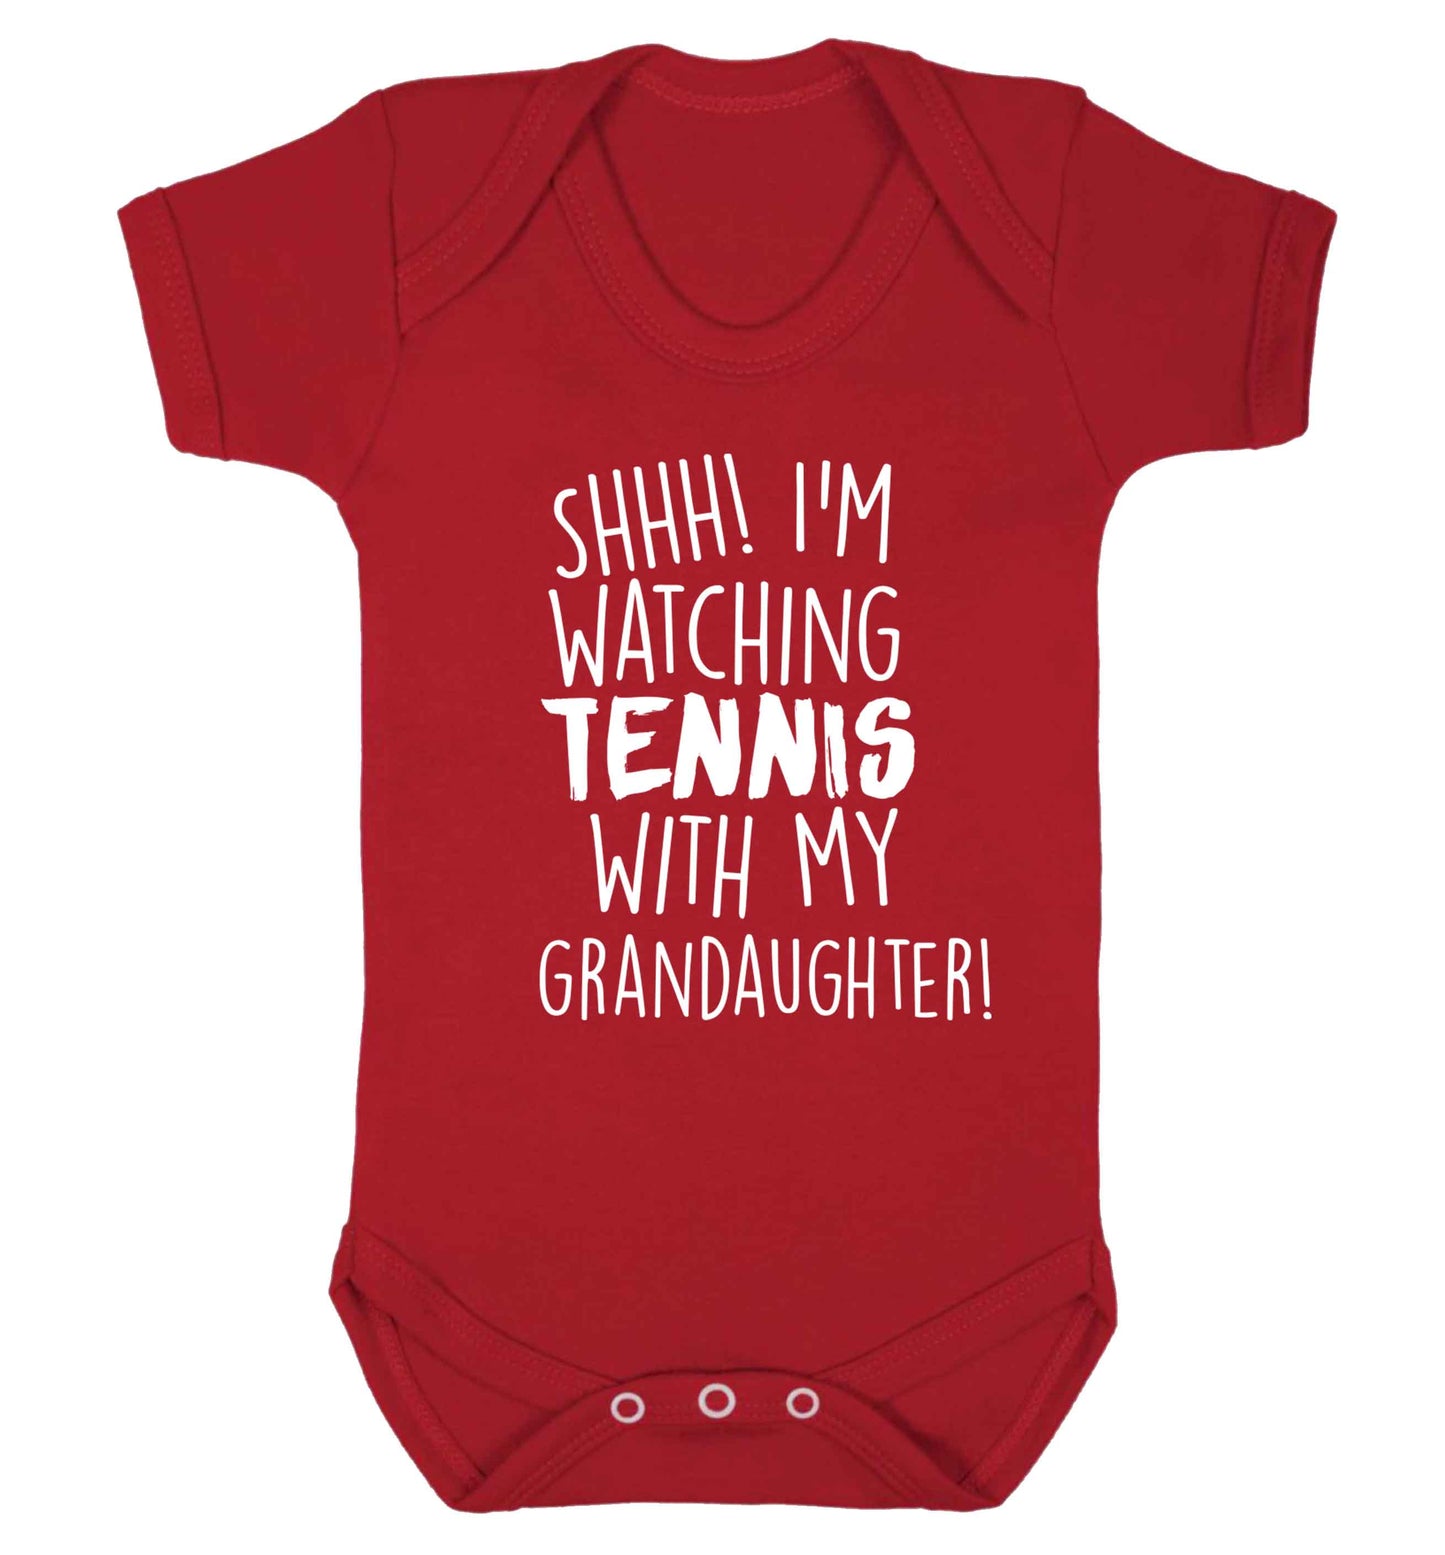 Shh! I'm watching tennis with my granddaughter! Baby Vest red 18-24 months